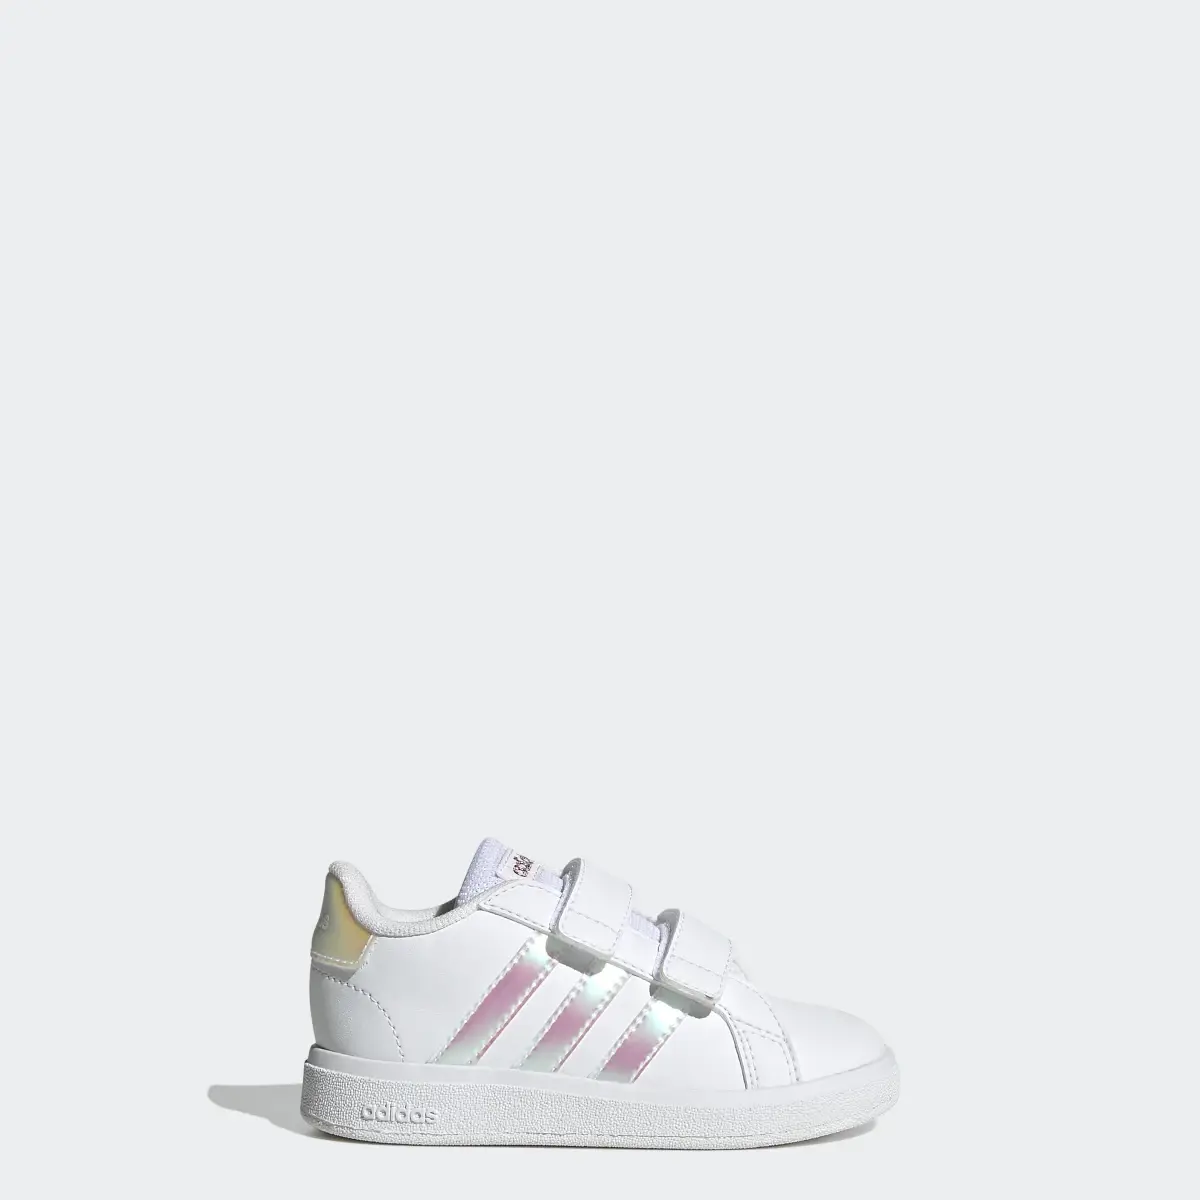 Adidas Grand Court Lifestyle Court Hook and Loop Schuh. 1